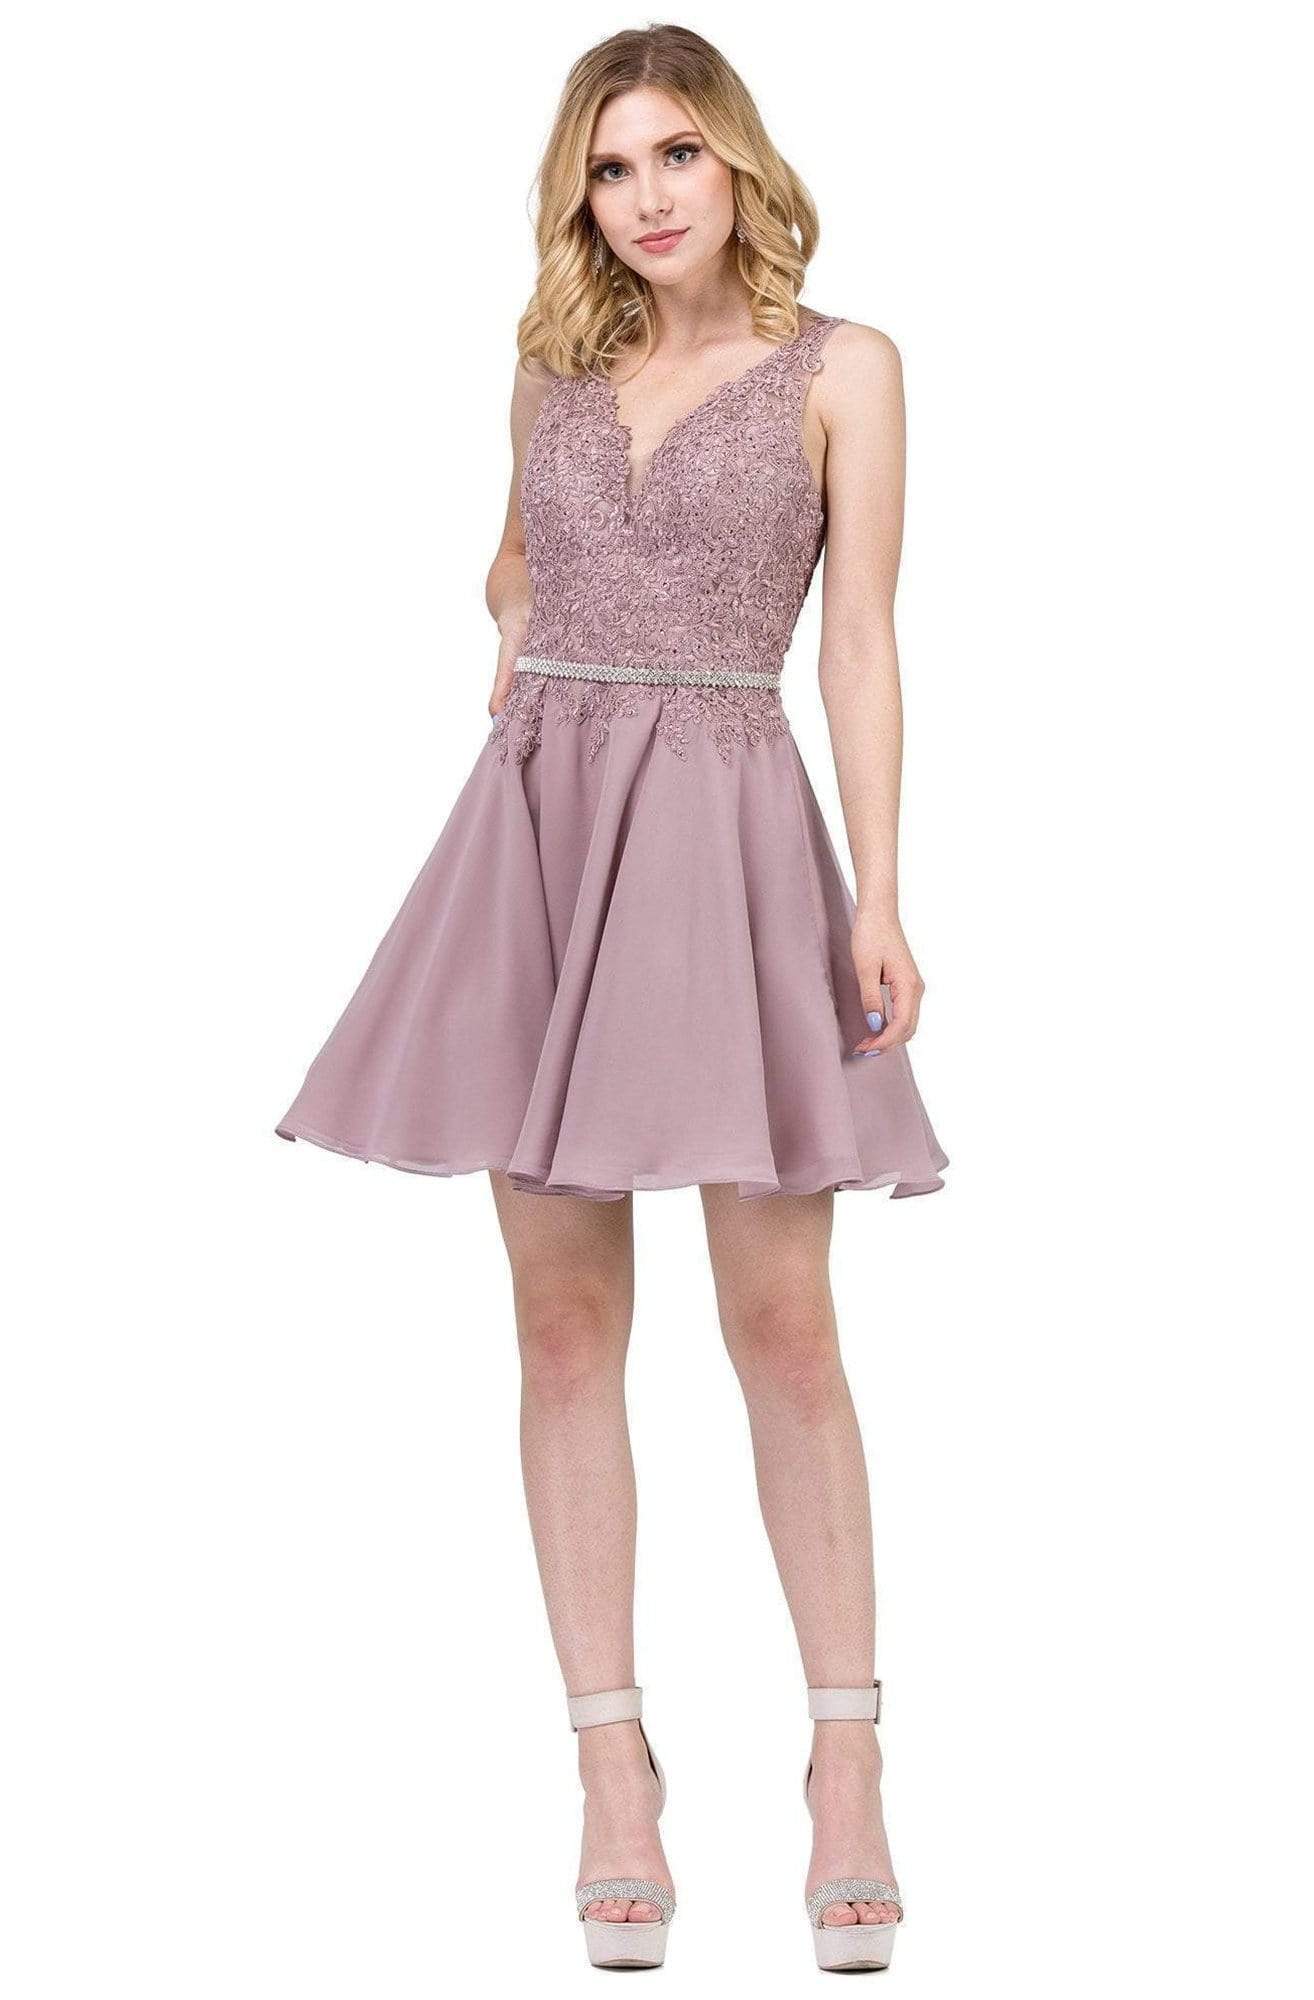 Image of Dancing Queen - 3011 Plunging V-Neck Lace Bodice Homecoming Dress